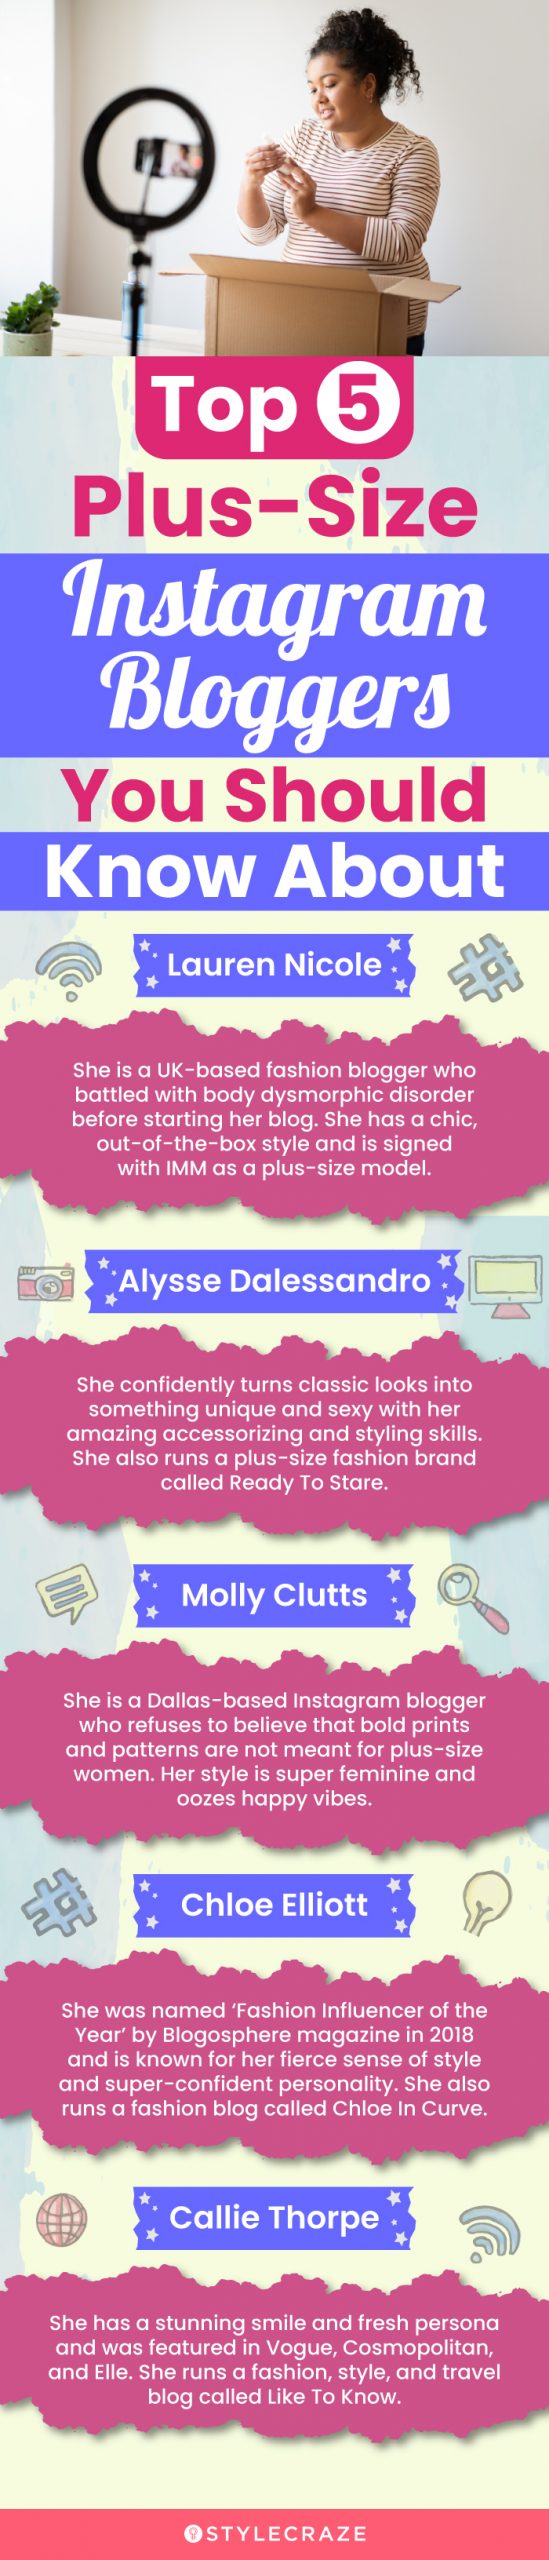 top 5 instagram plus-size bloggers you should know about (infographic)